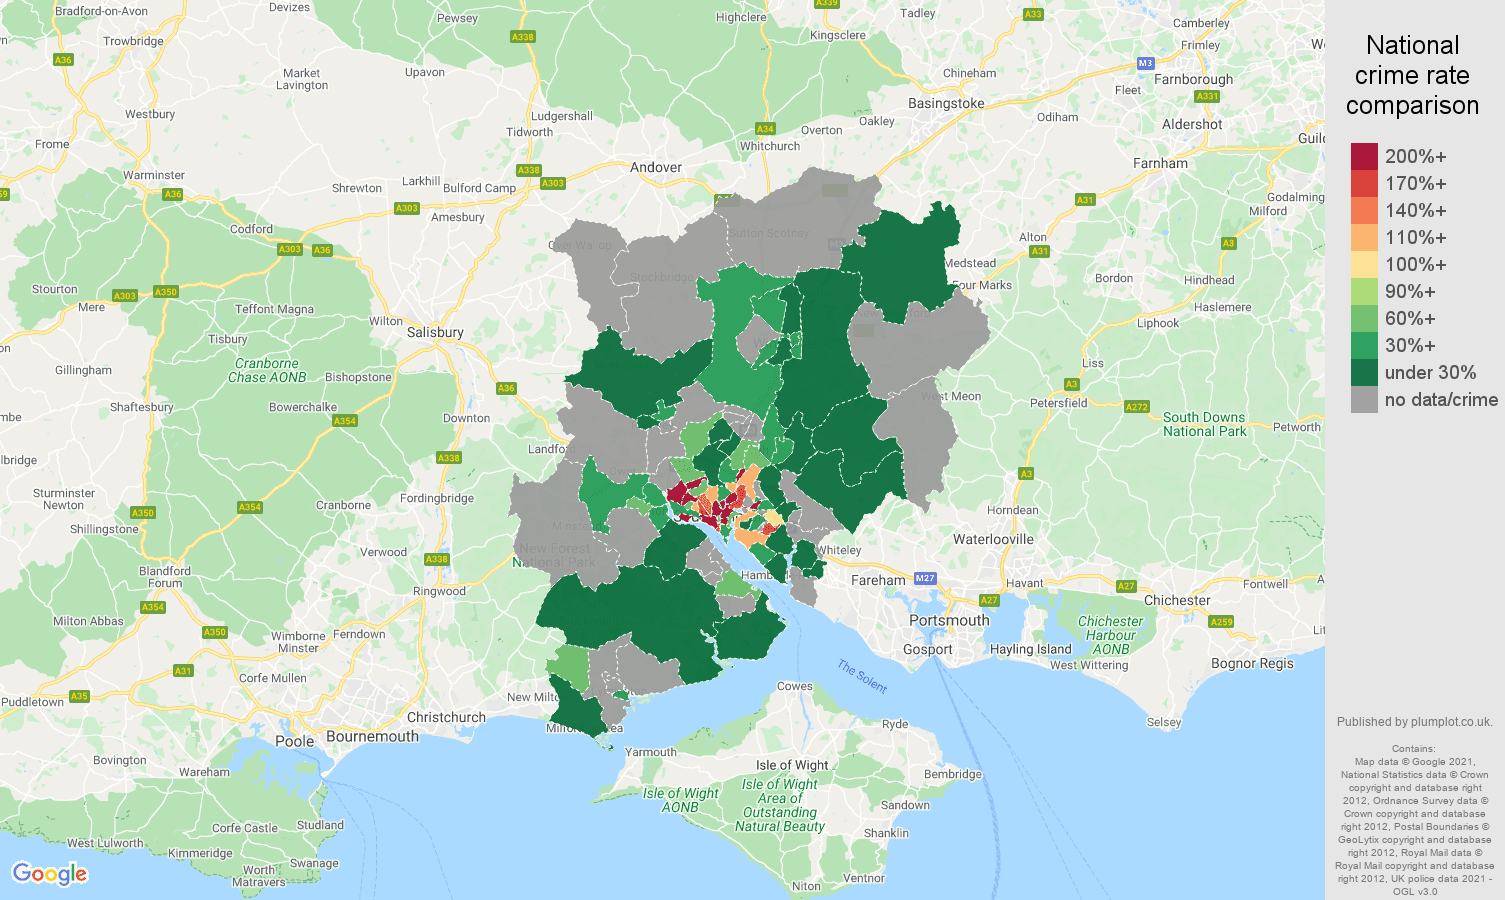 Southampton robbery crime rate comparison map